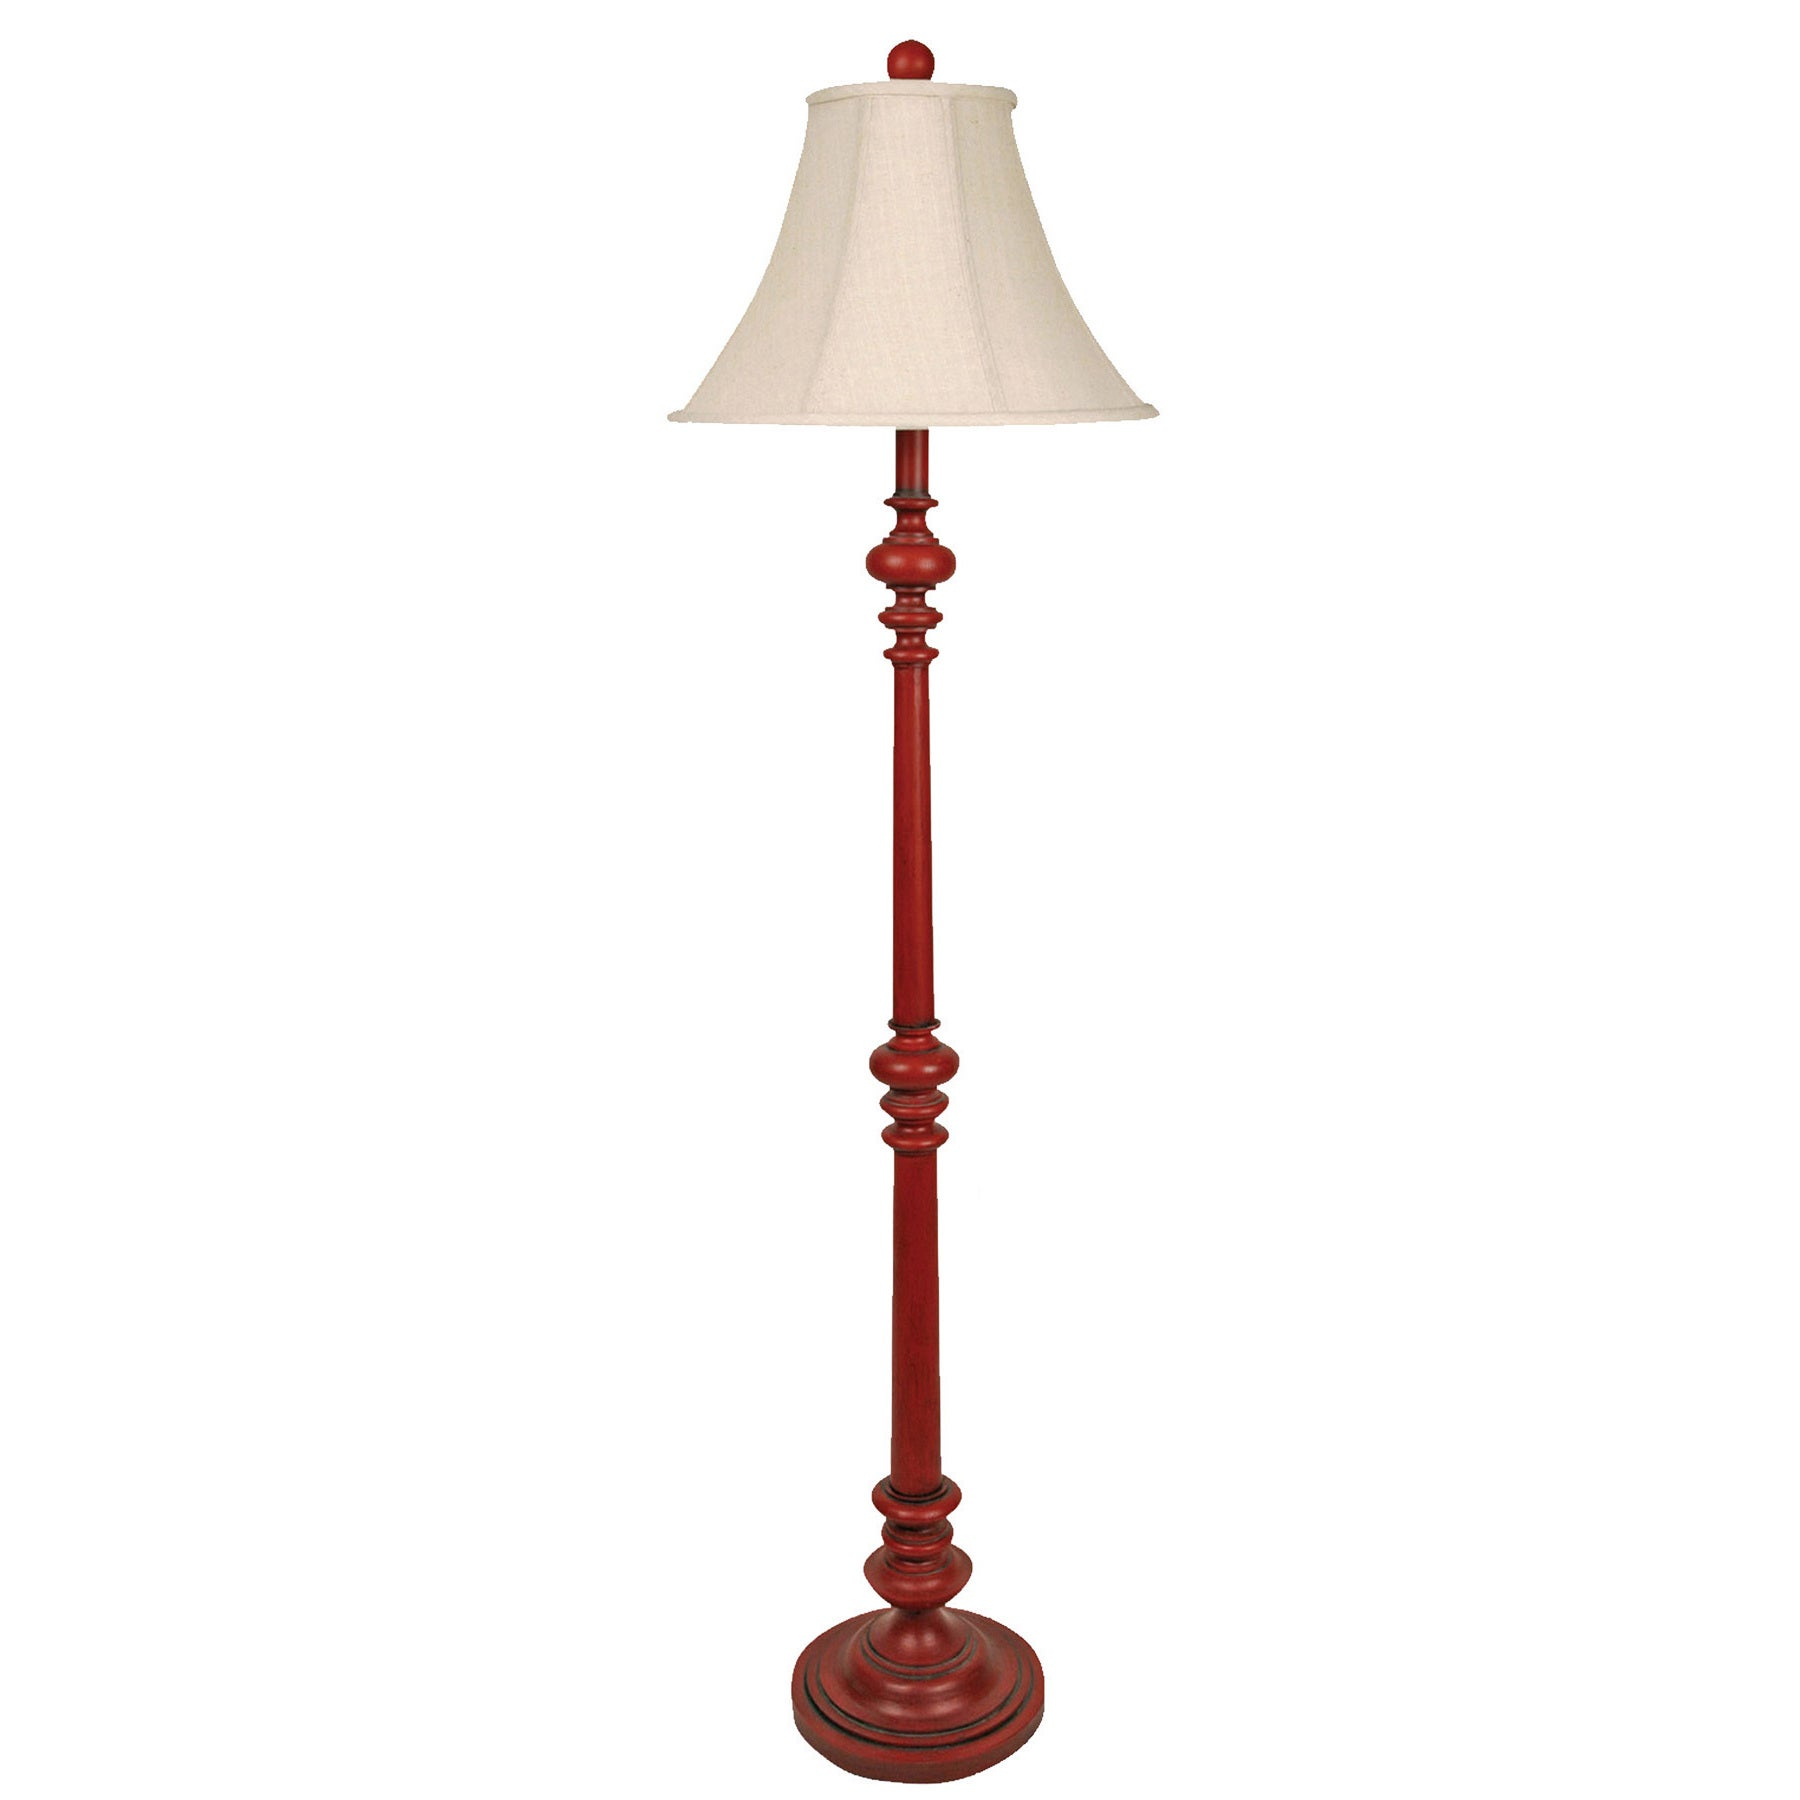 French bedroom lamps